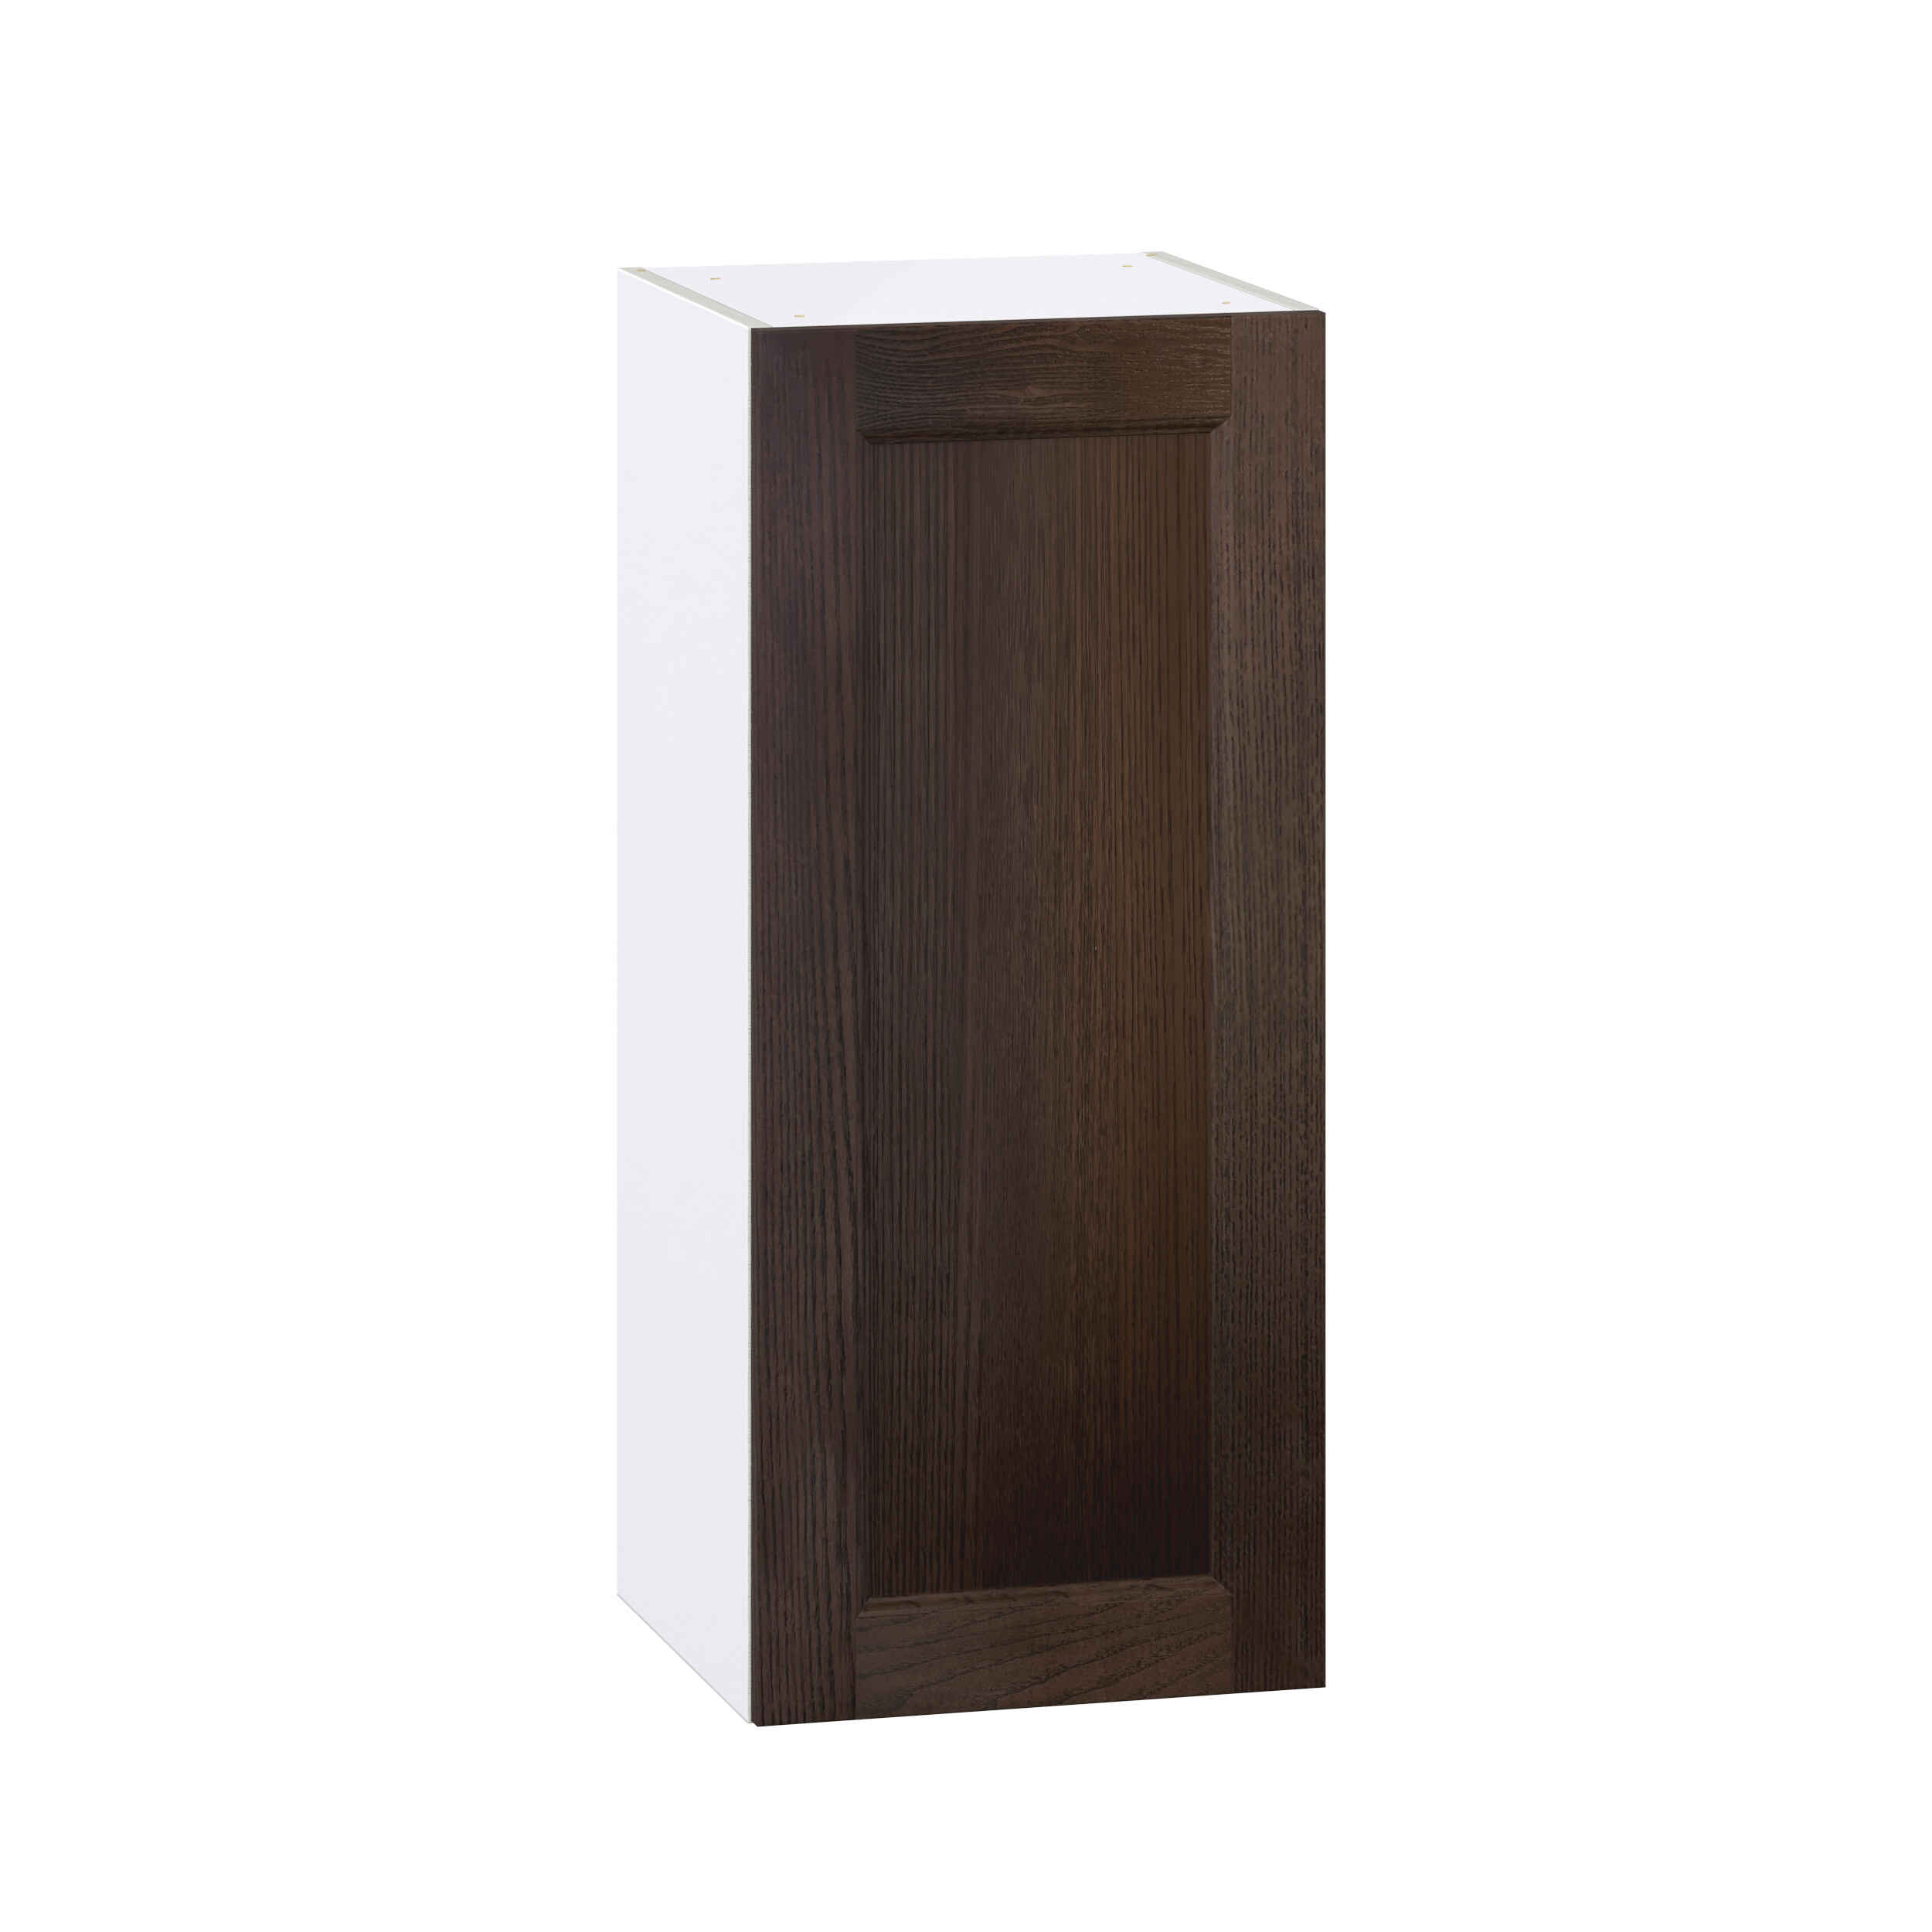 Summerina Chestnut Solid Wood Recessed Assembled Wall  Cabinet with Full High Door (15 in. W x 35 in. H x 14 in. D)